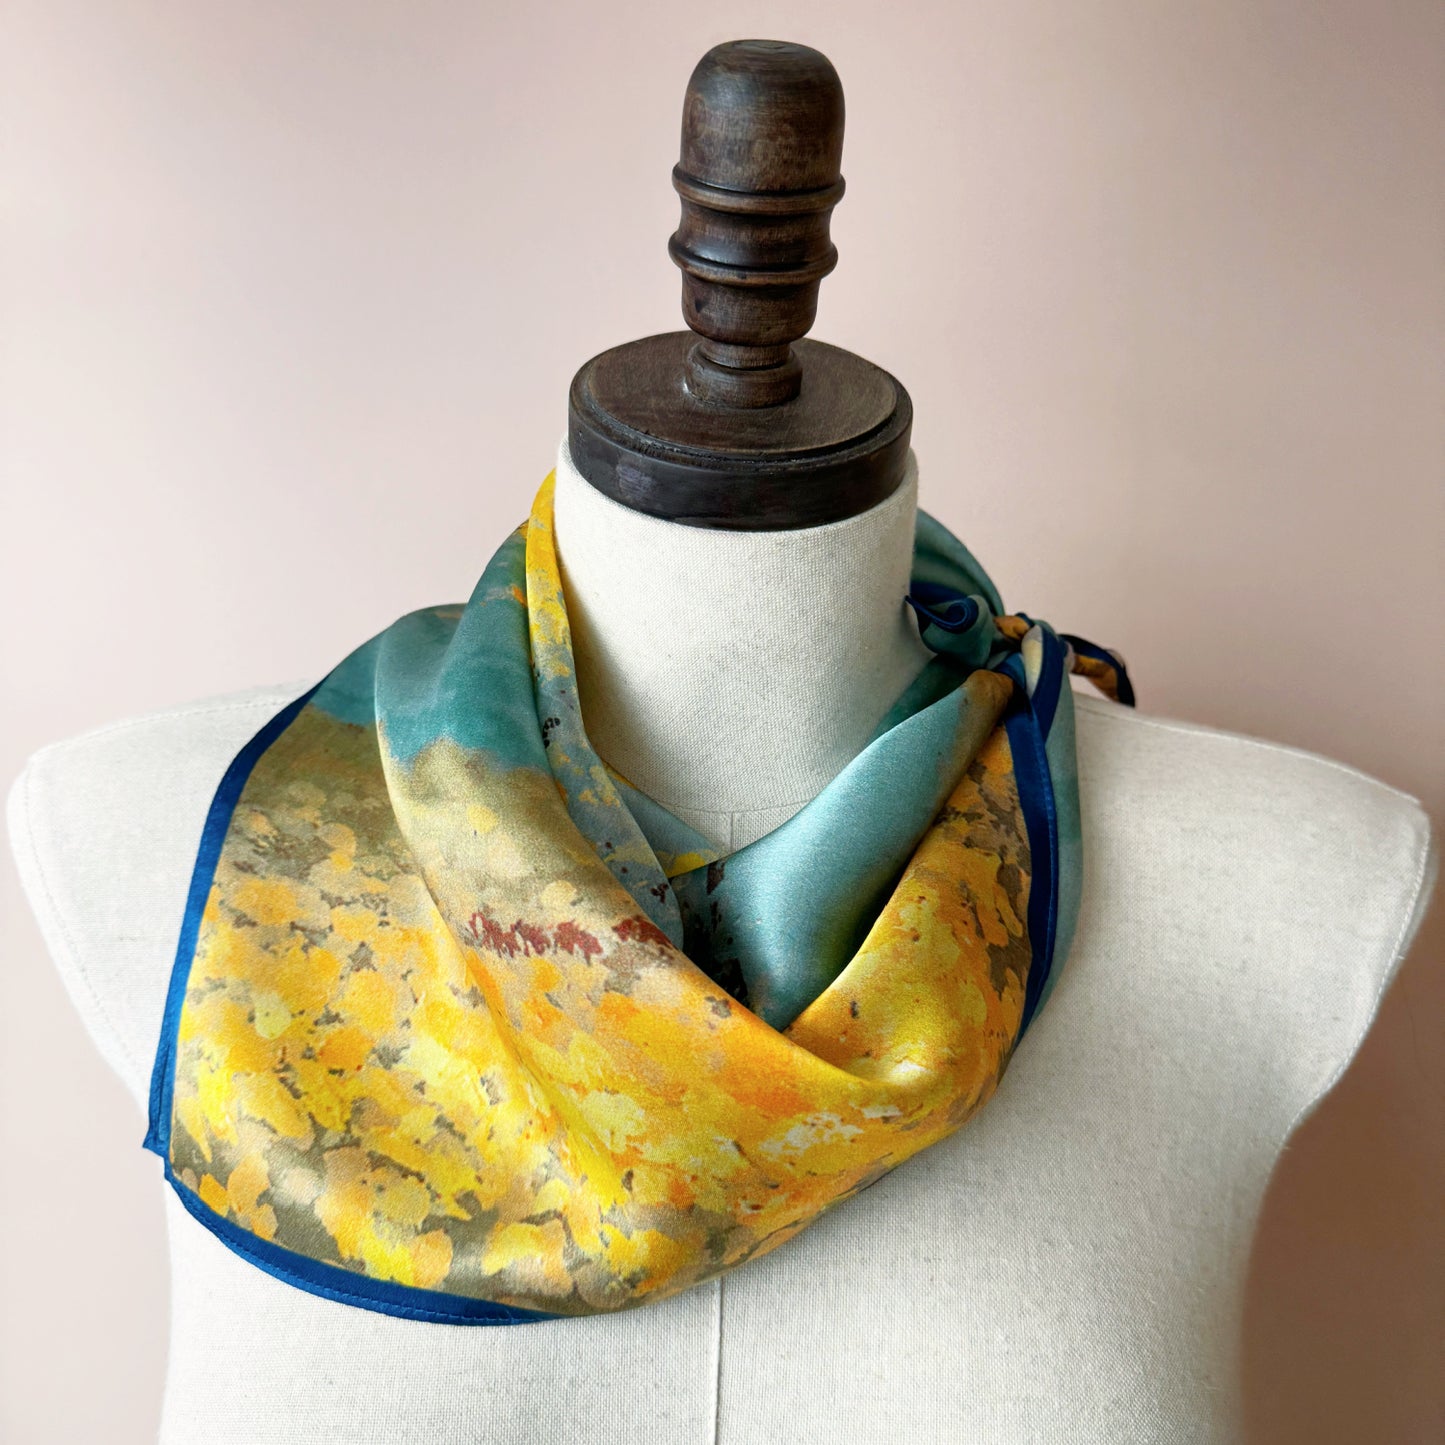 Shop vintage Scarf Gift, Silk Scarf, Women Silk Scarf, Men Silk Scarf, Silk Wrap, Silk Scarves, Hand Dyed Silk, Silk Hair Scarf, Silk Bandana, Silk Square Scarf, Silk Headband, Silk Ponytail Scarf, Gifts for Girlfriend, Gifts for Mom, Gifts for Sister, Gifts for Wife, Gifts for Her, Gifts